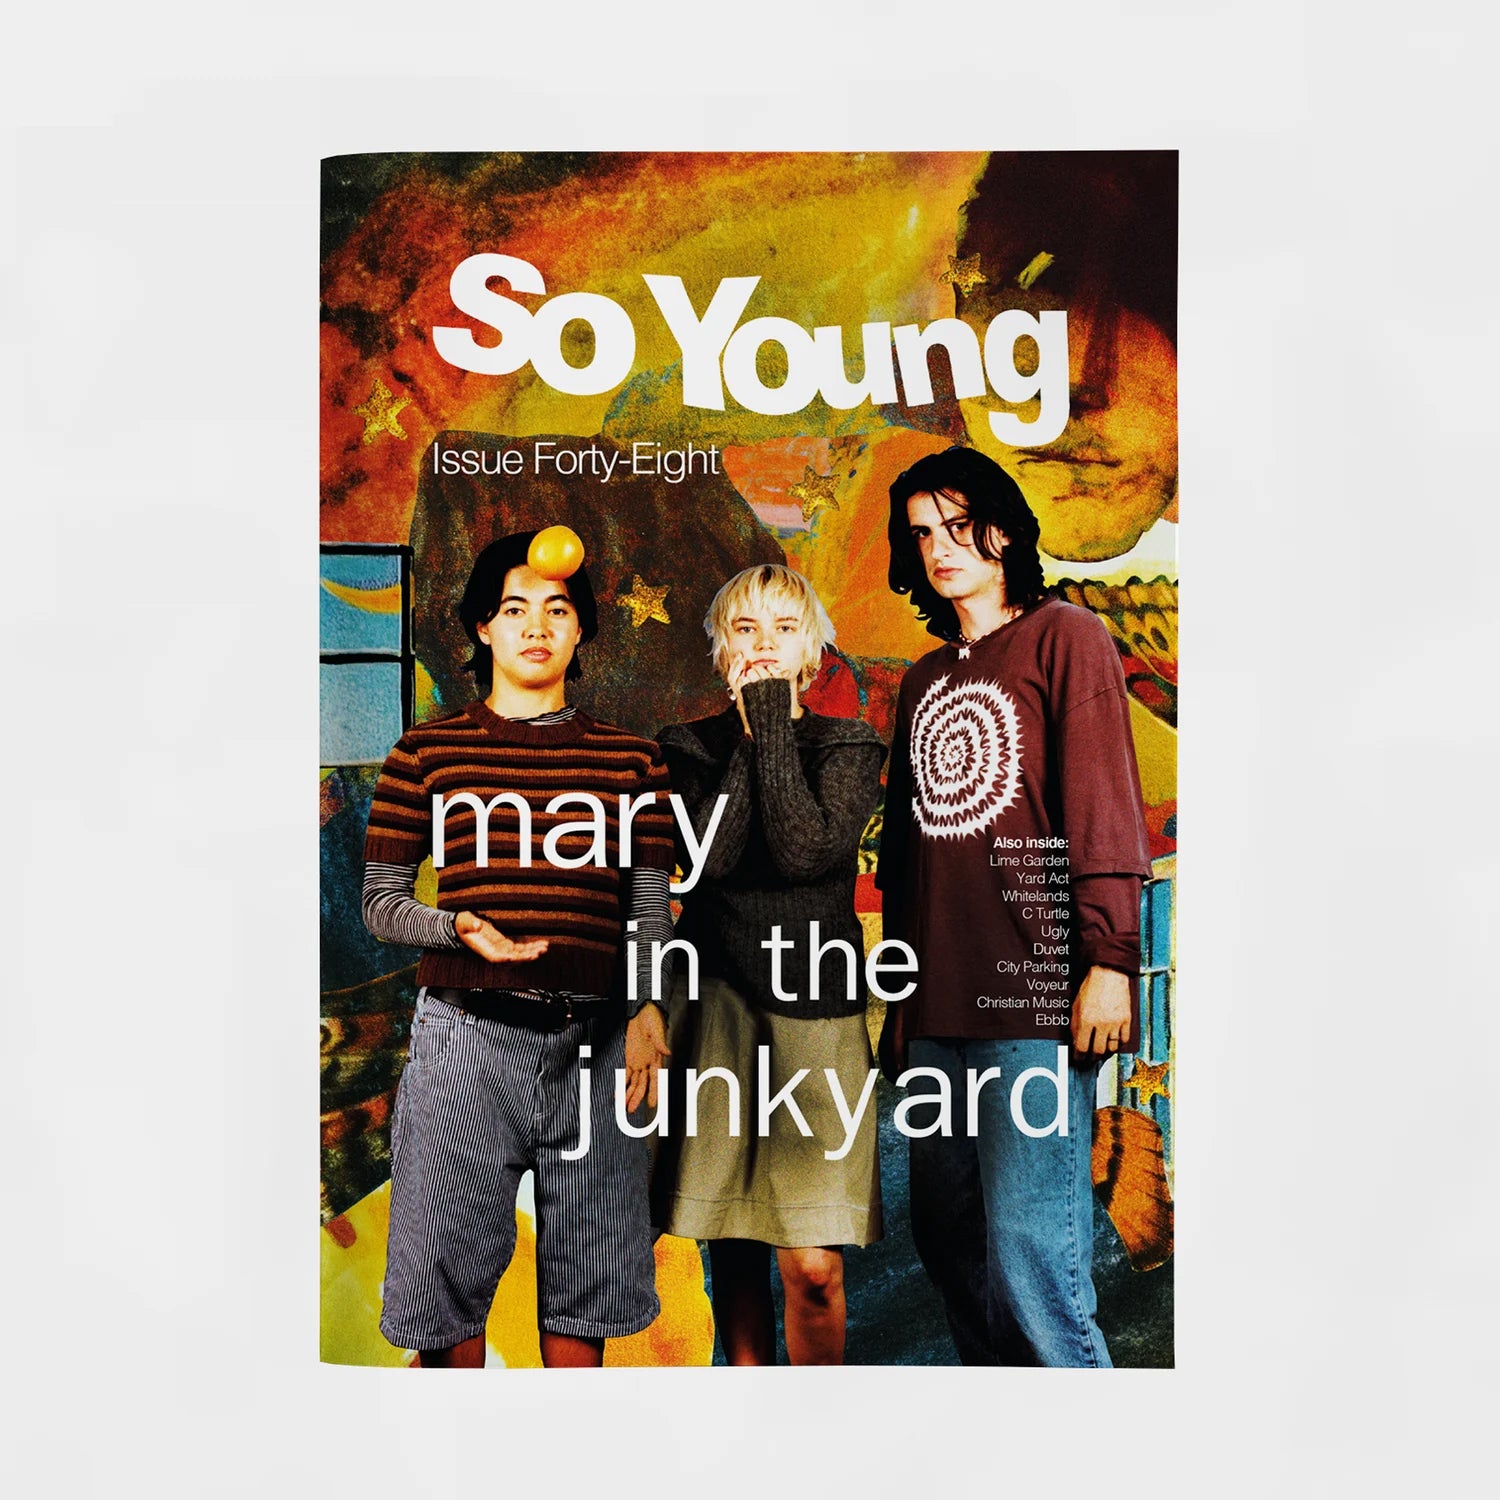 SO YOUNG 'ISSUE FORTY-EIGHT'